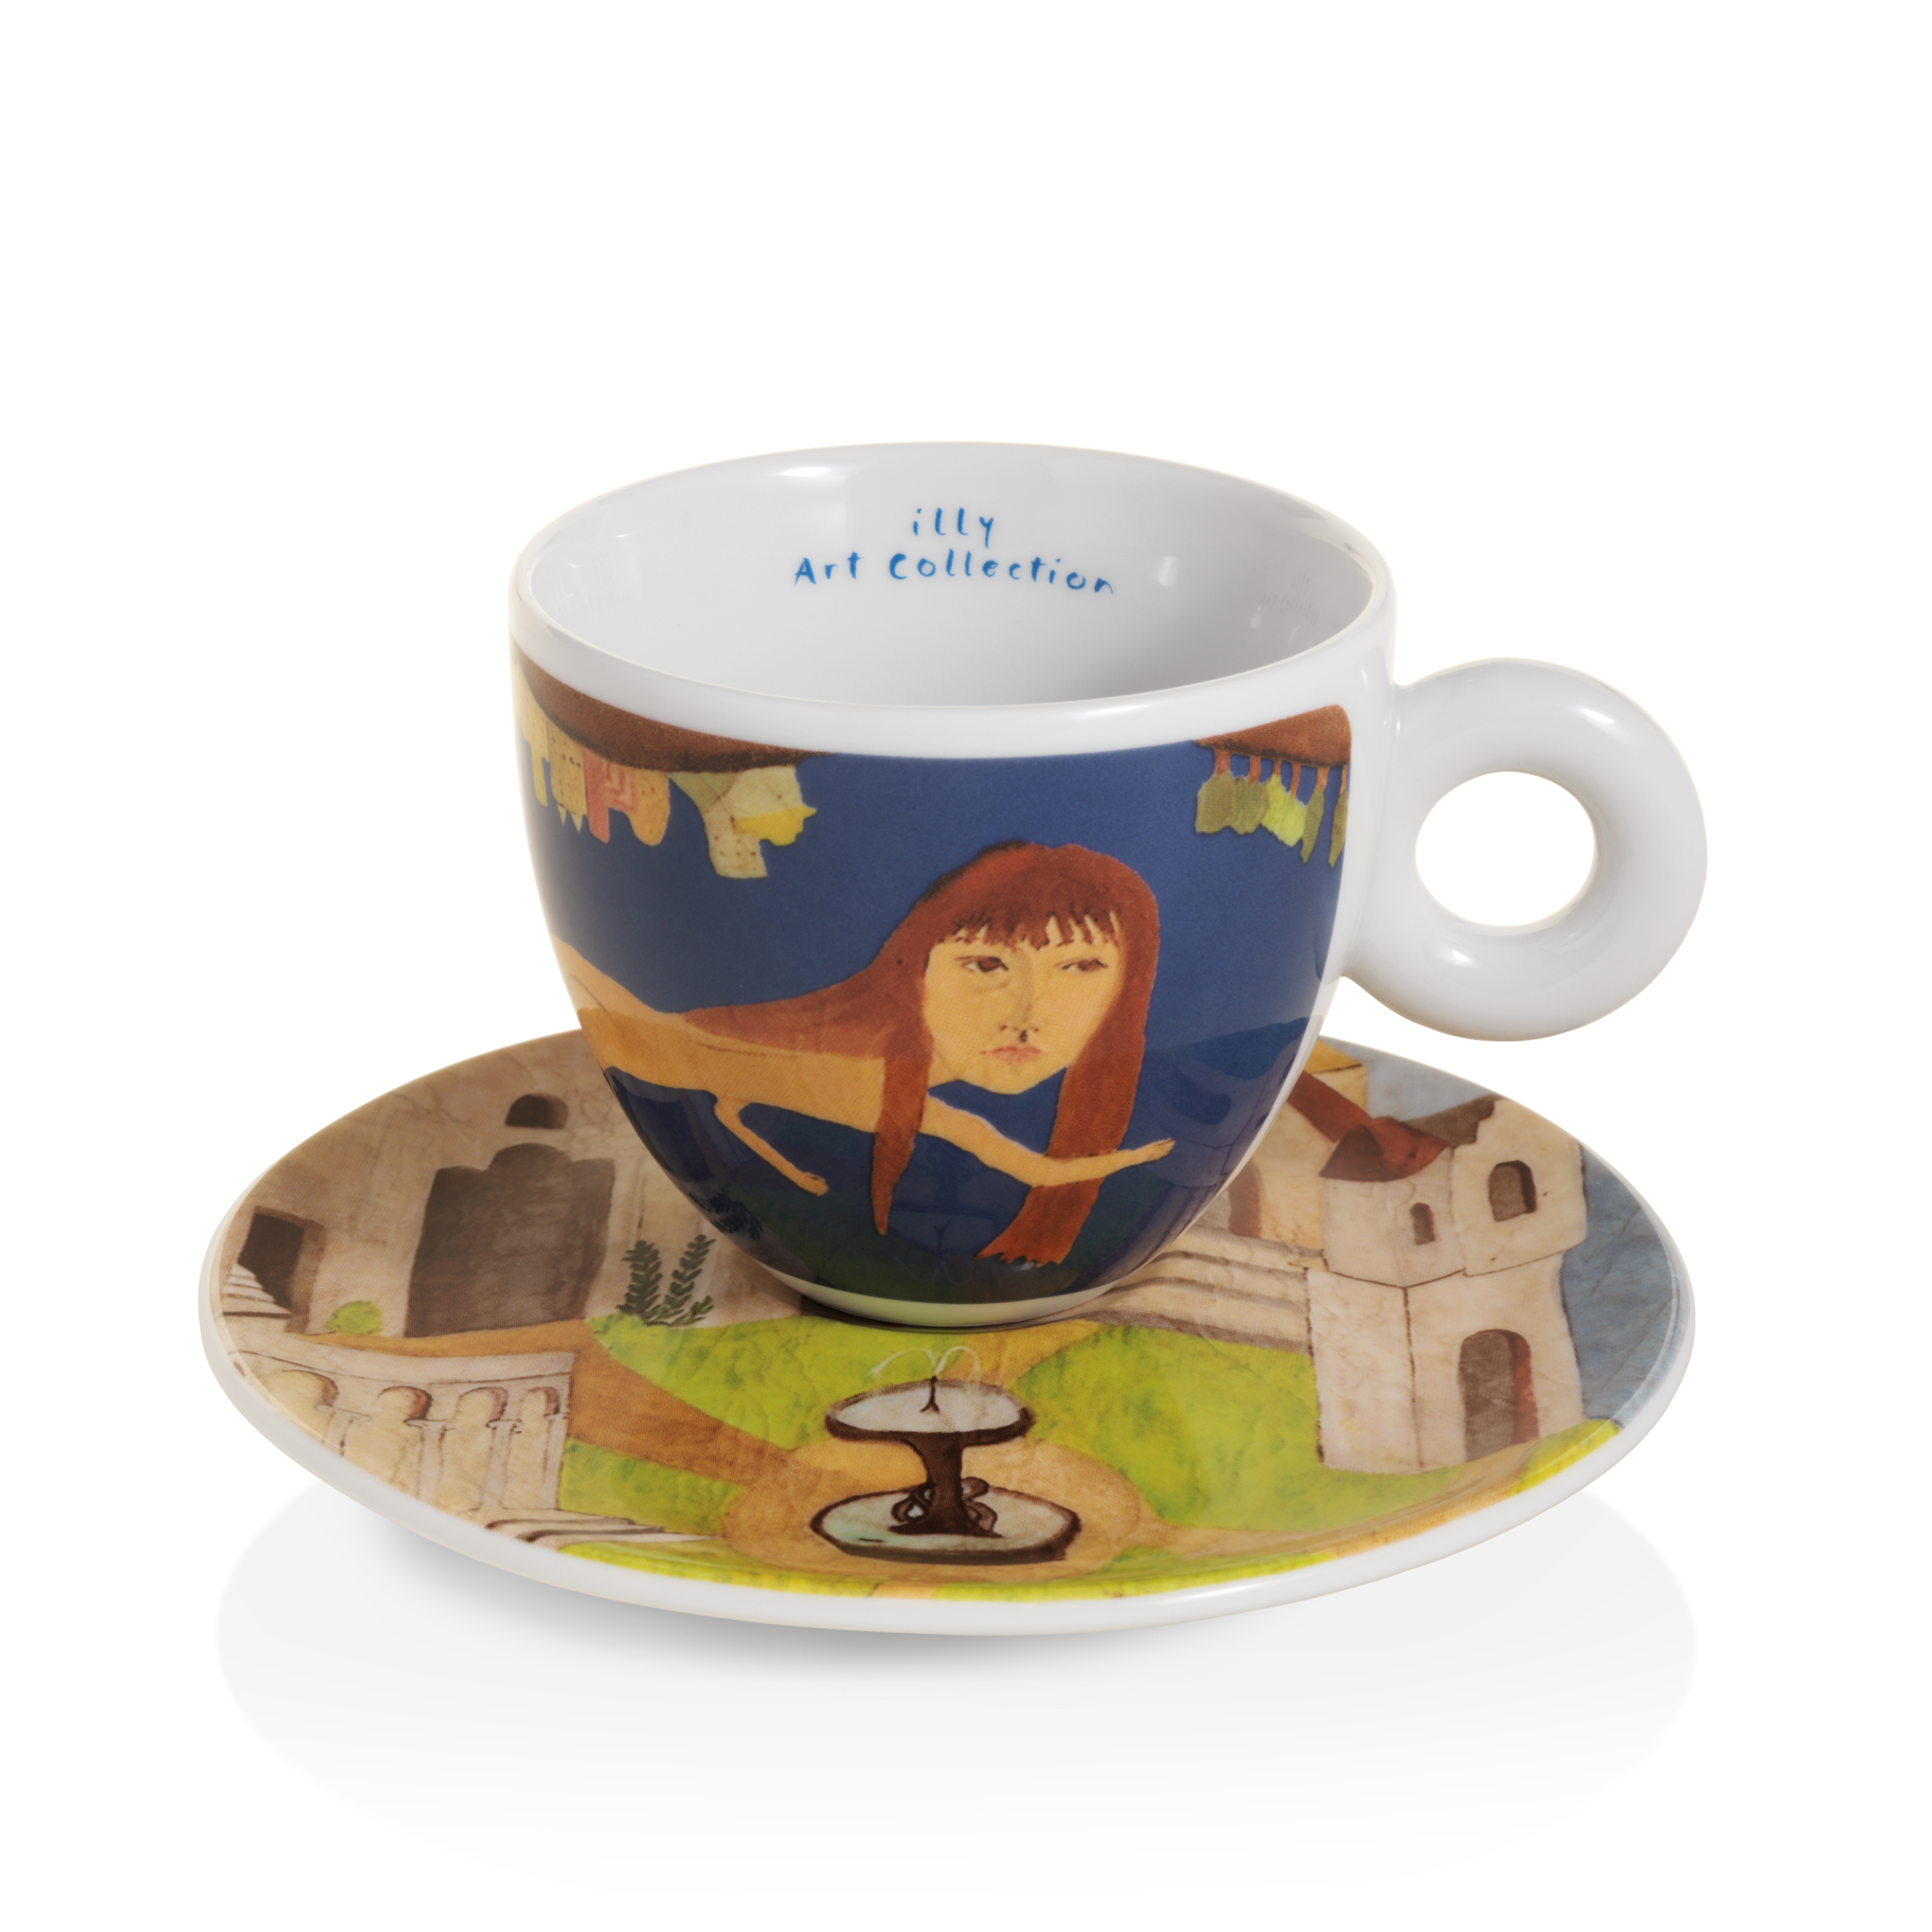 illy Art Collection ΒΙΕΝΝΑLE 2022 Σετ Δώρου 2 Cappuccino Cups | BAEZA & VICUNA, Φλιτζάνια , 02-02-6083